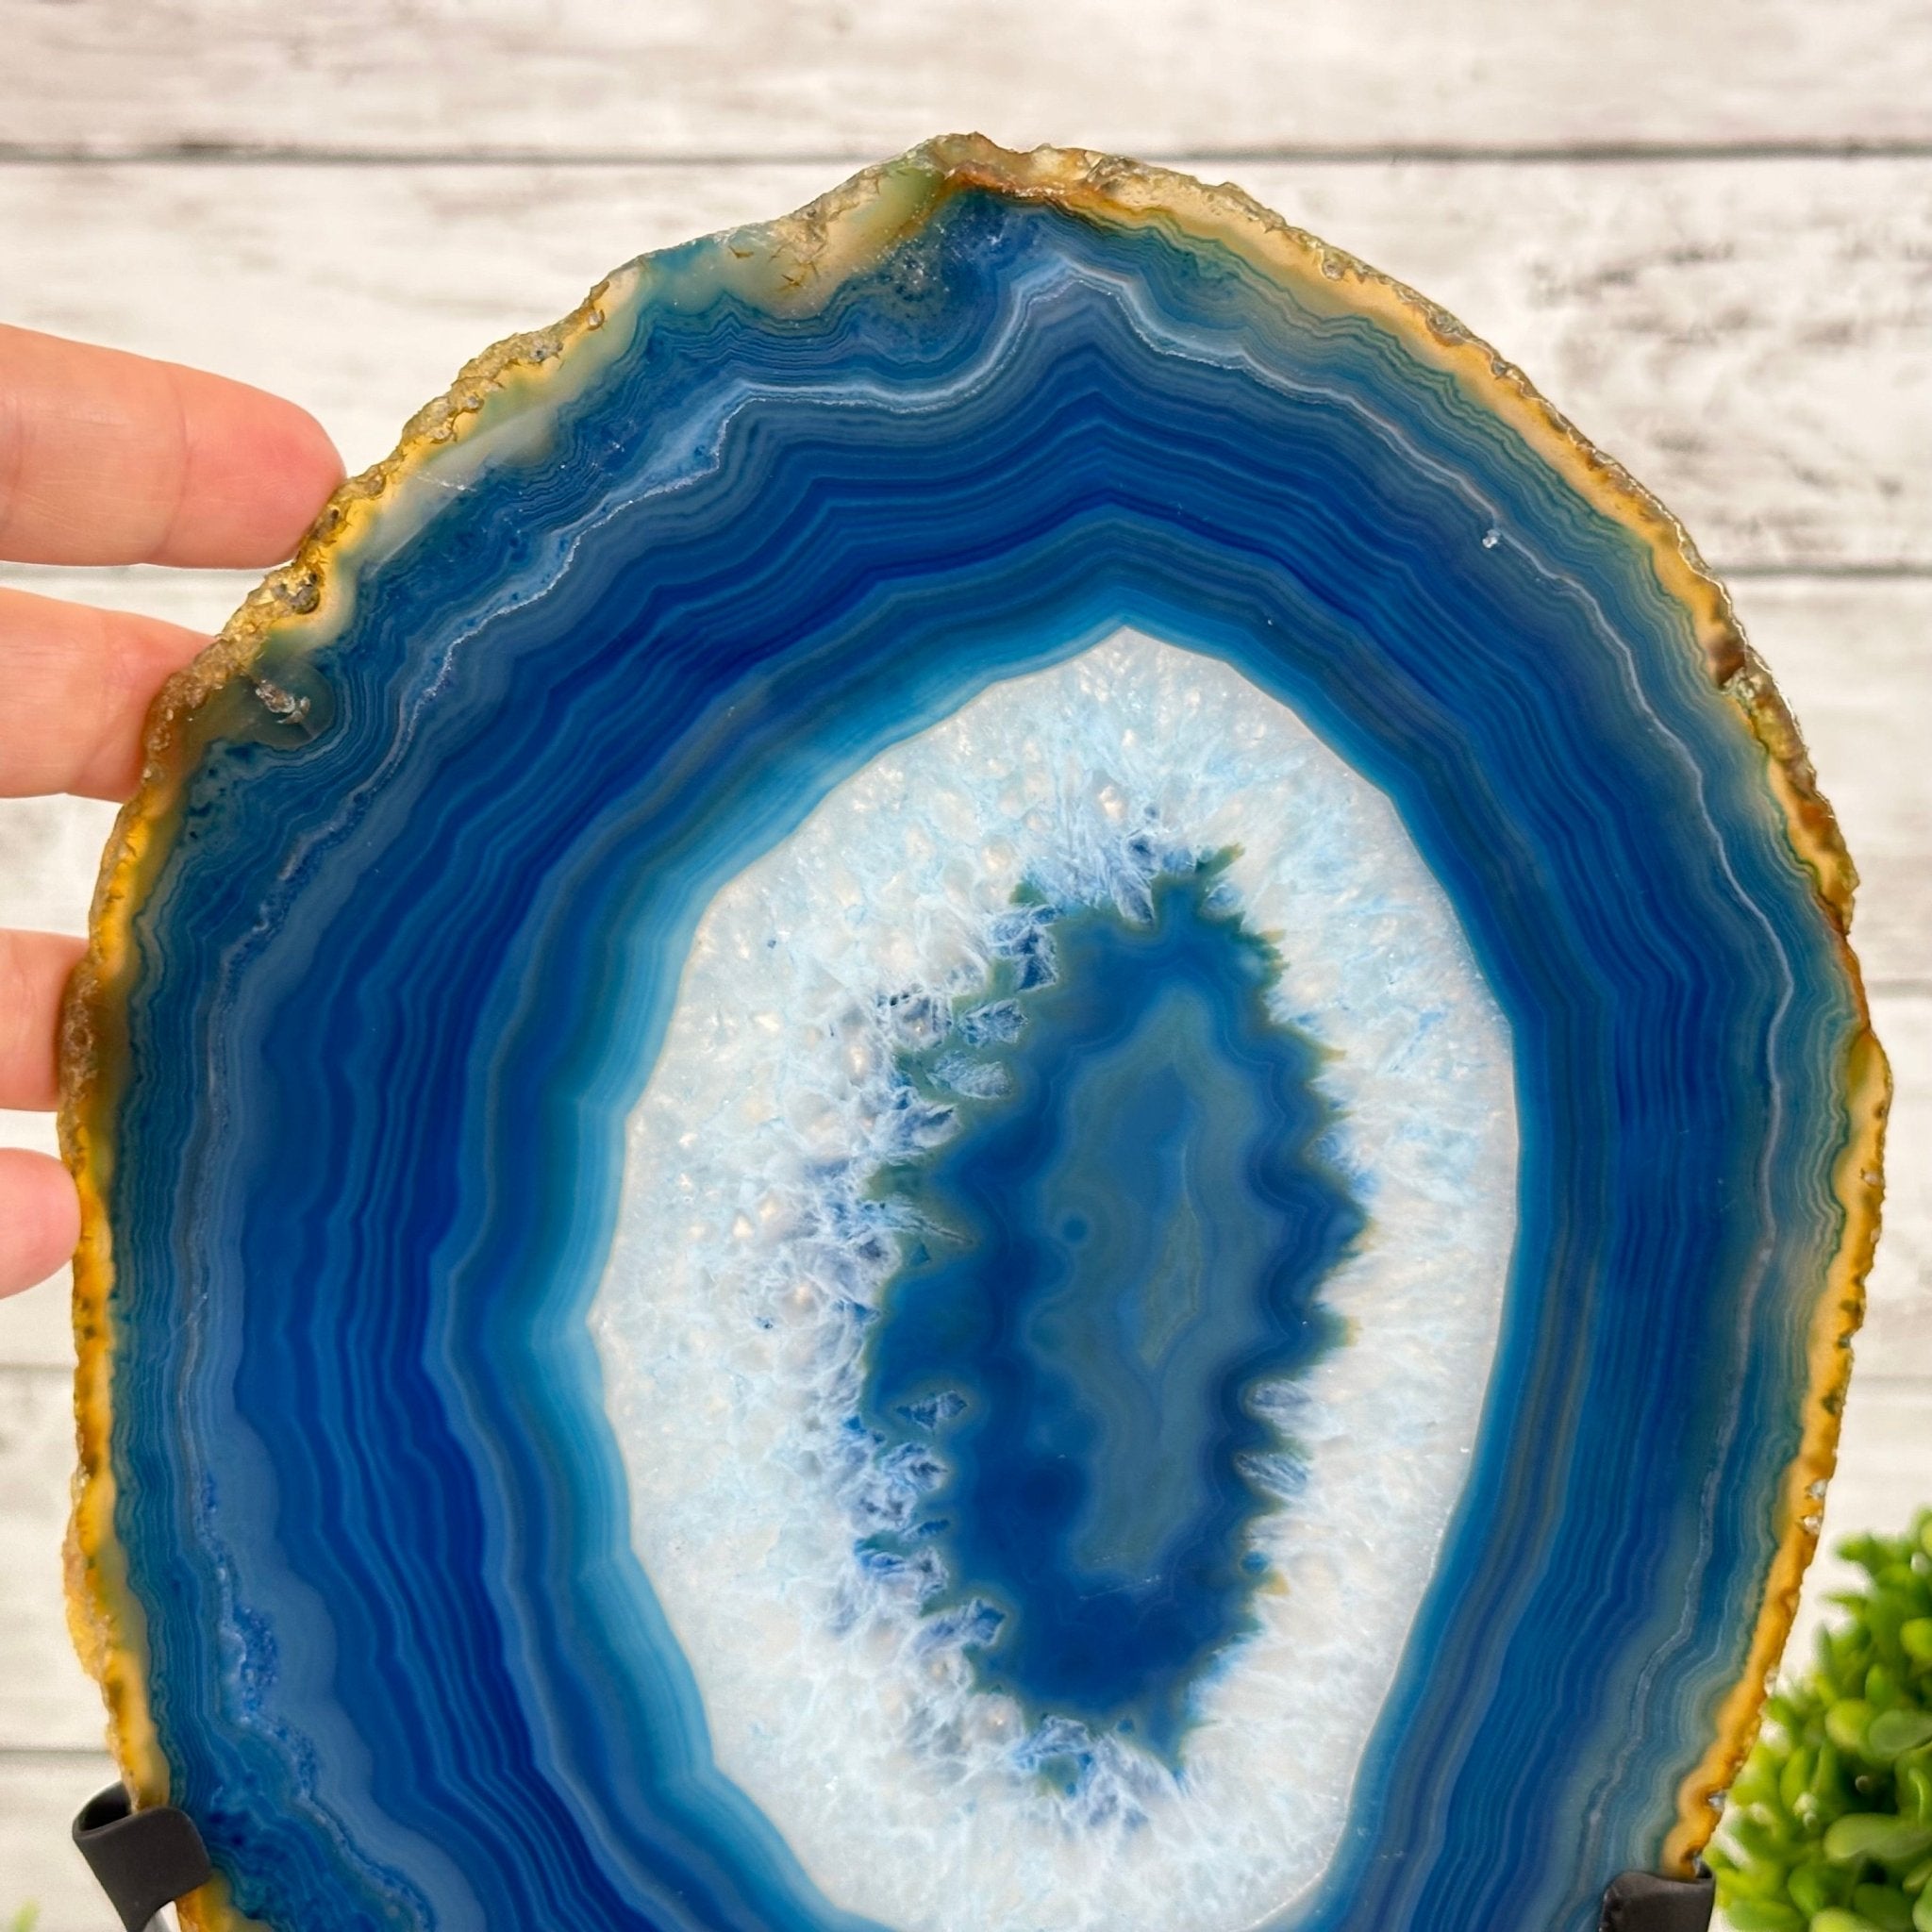 Brazilian Blue Agate Slice on a Metal Stand, 12.5" Tall #5055-0139 - Brazil GemsBrazil GemsBrazilian Blue Agate Slice on a Metal Stand, 12.5" Tall #5055-0139Slices on Fixed Bases5055-0139